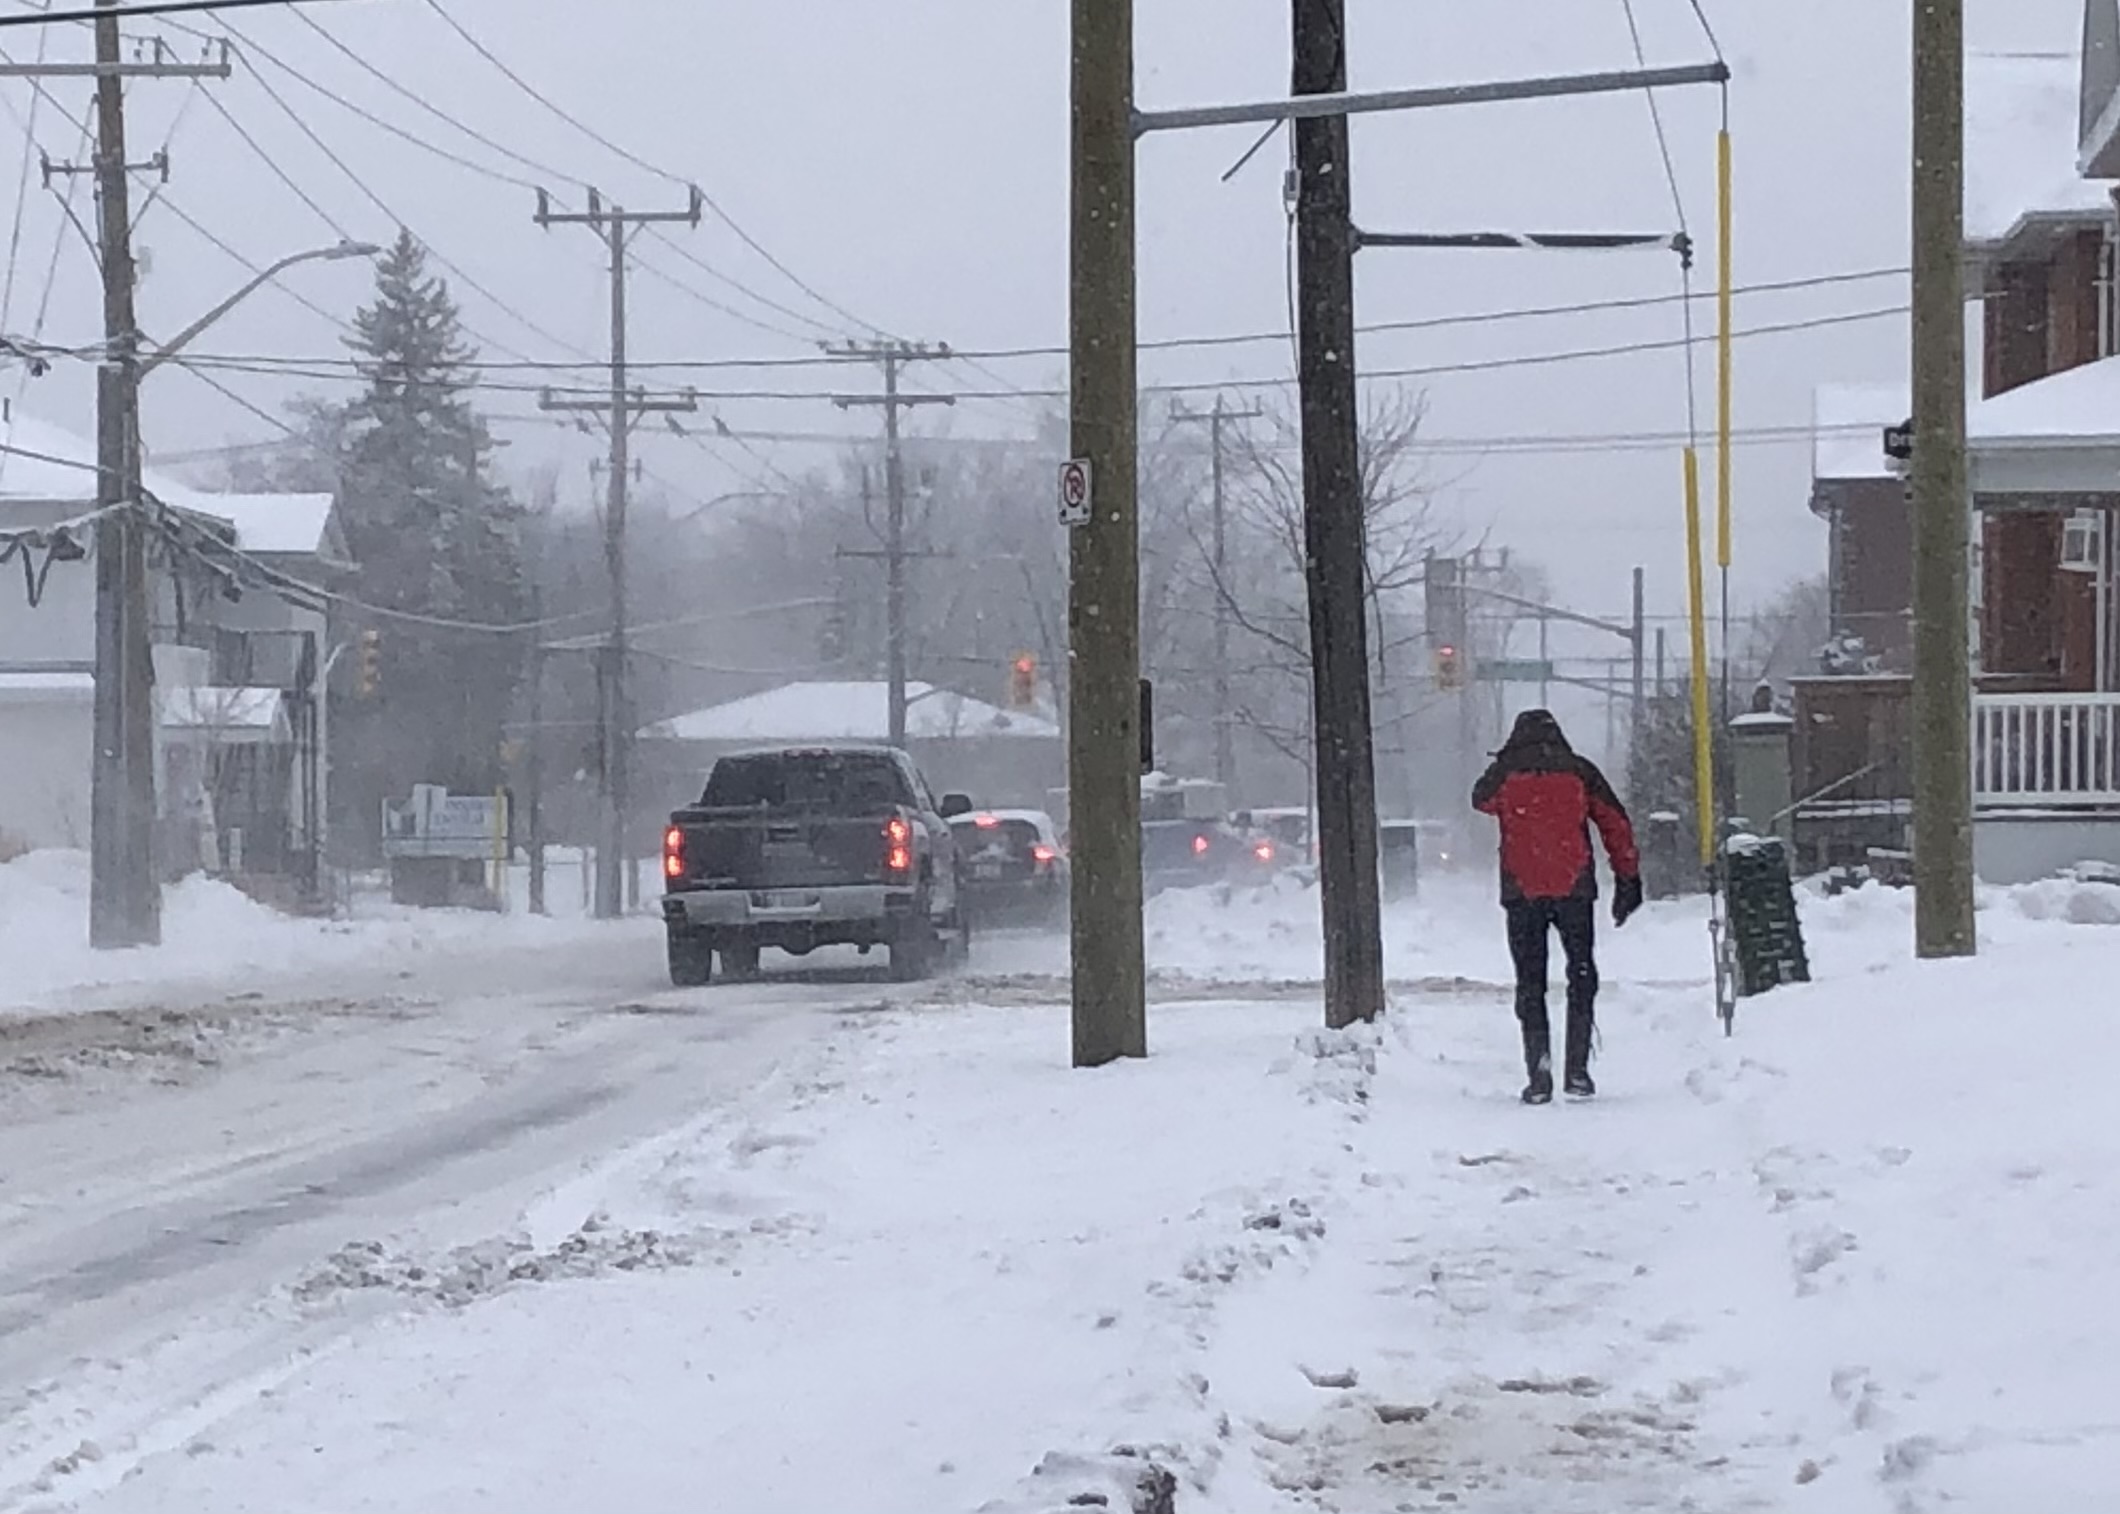 A strong blast of winter weather is expected to hit central Ontario